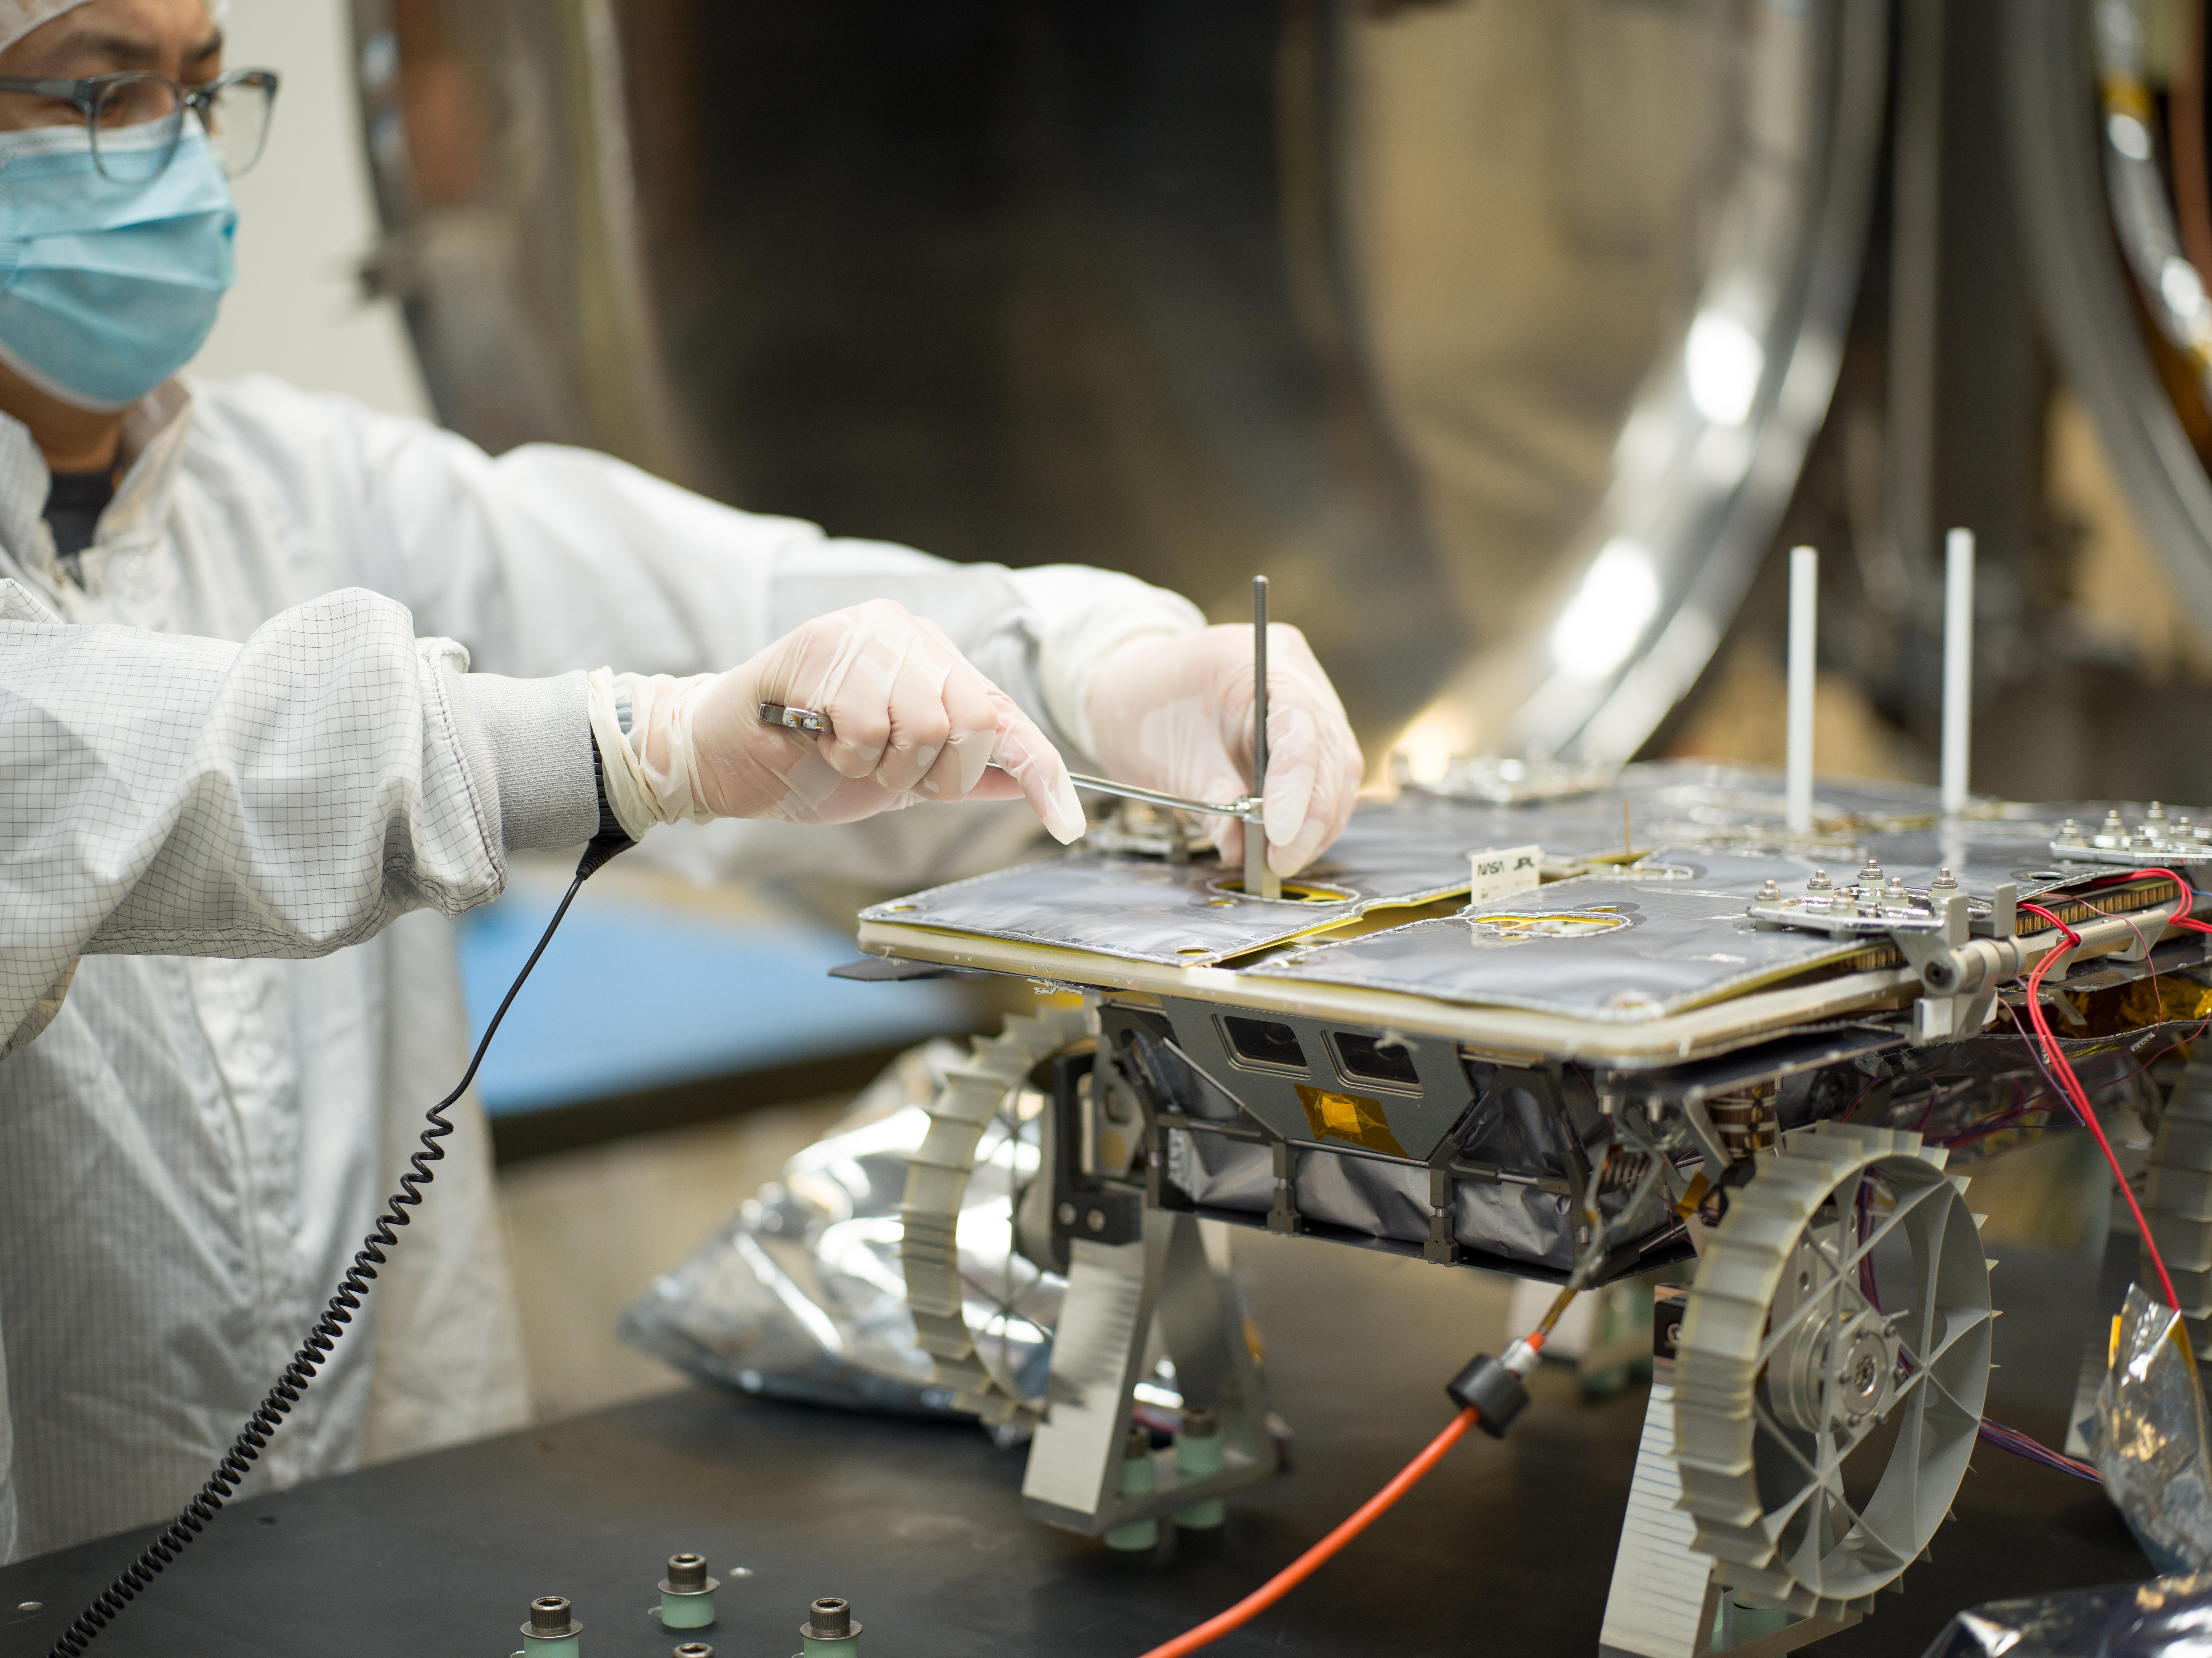 An engineer in white protective gear, a blue mask, and glasses works on a small rover. The rover is small enough to fit on a black tabletop. The rover has a flat top and four gear-like wheels.